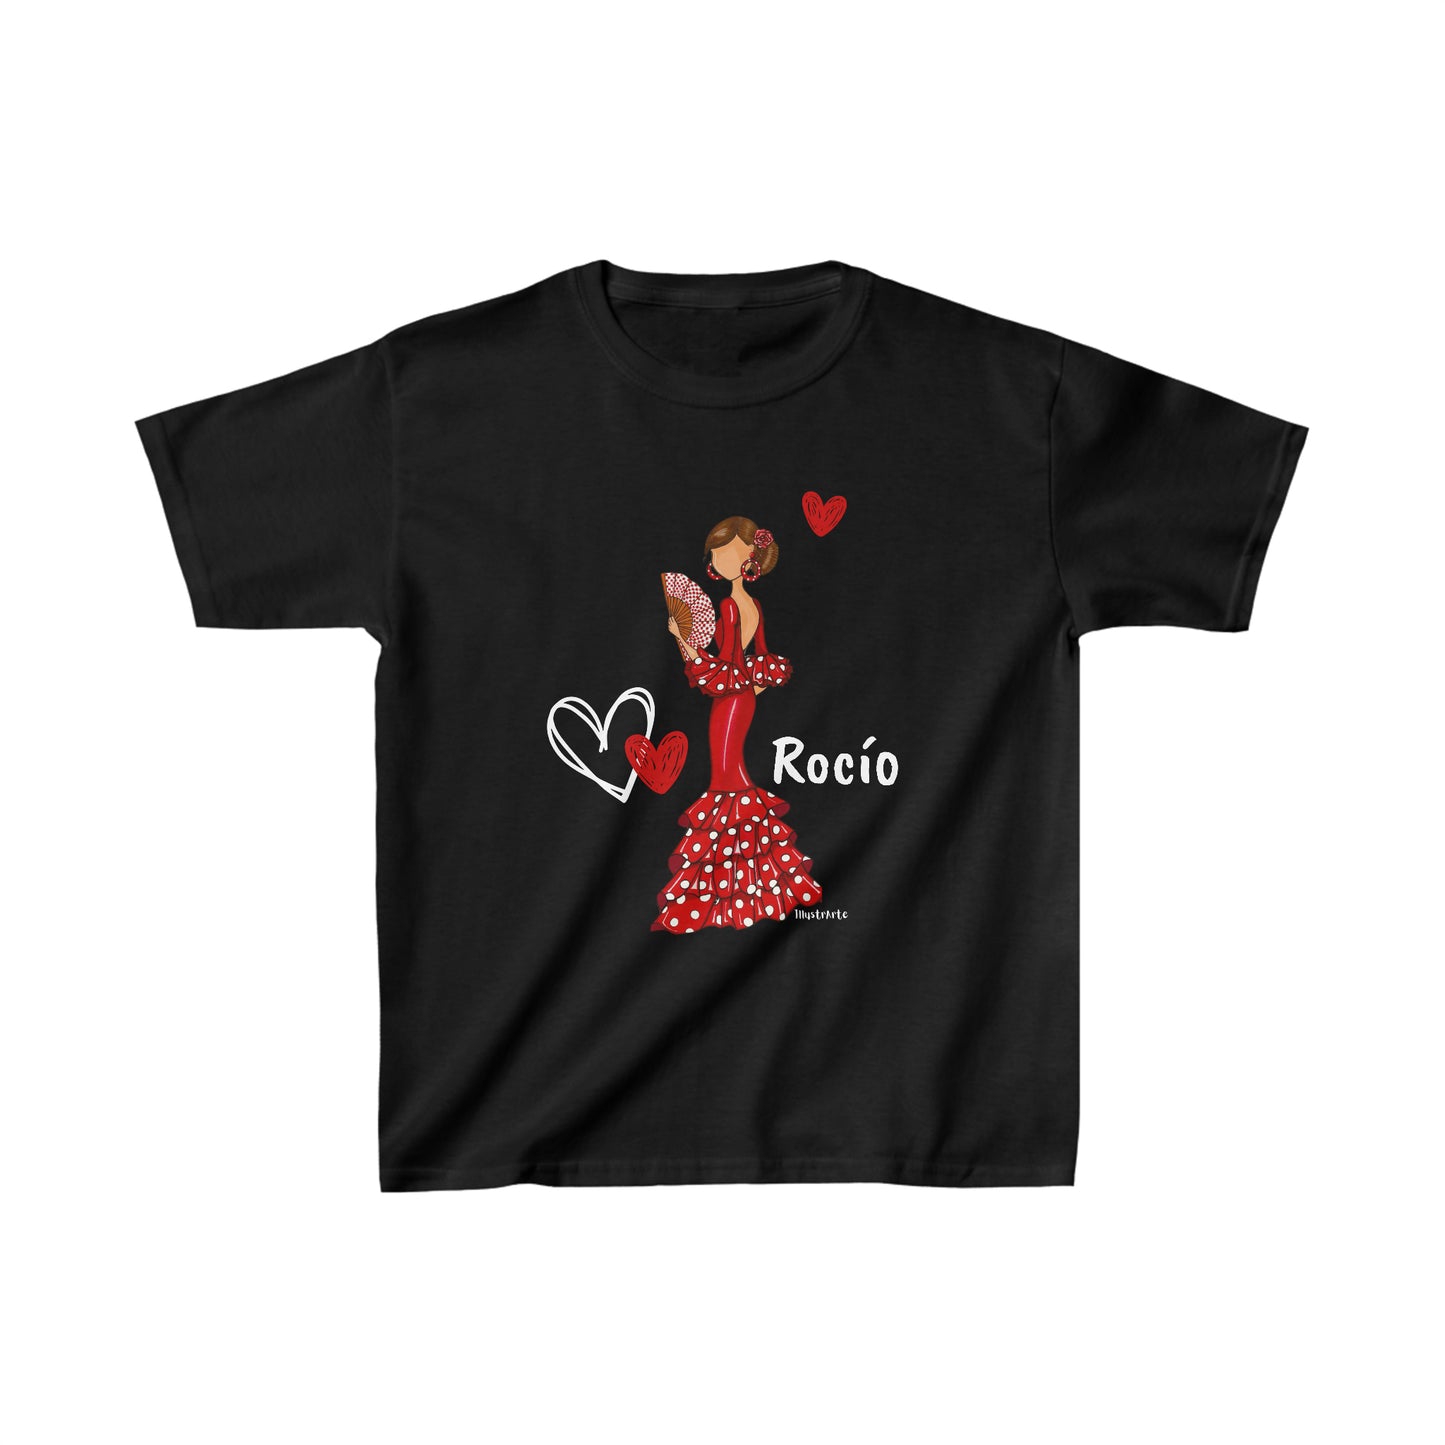 a black t - shirt with a picture of a woman in a polka dot dress